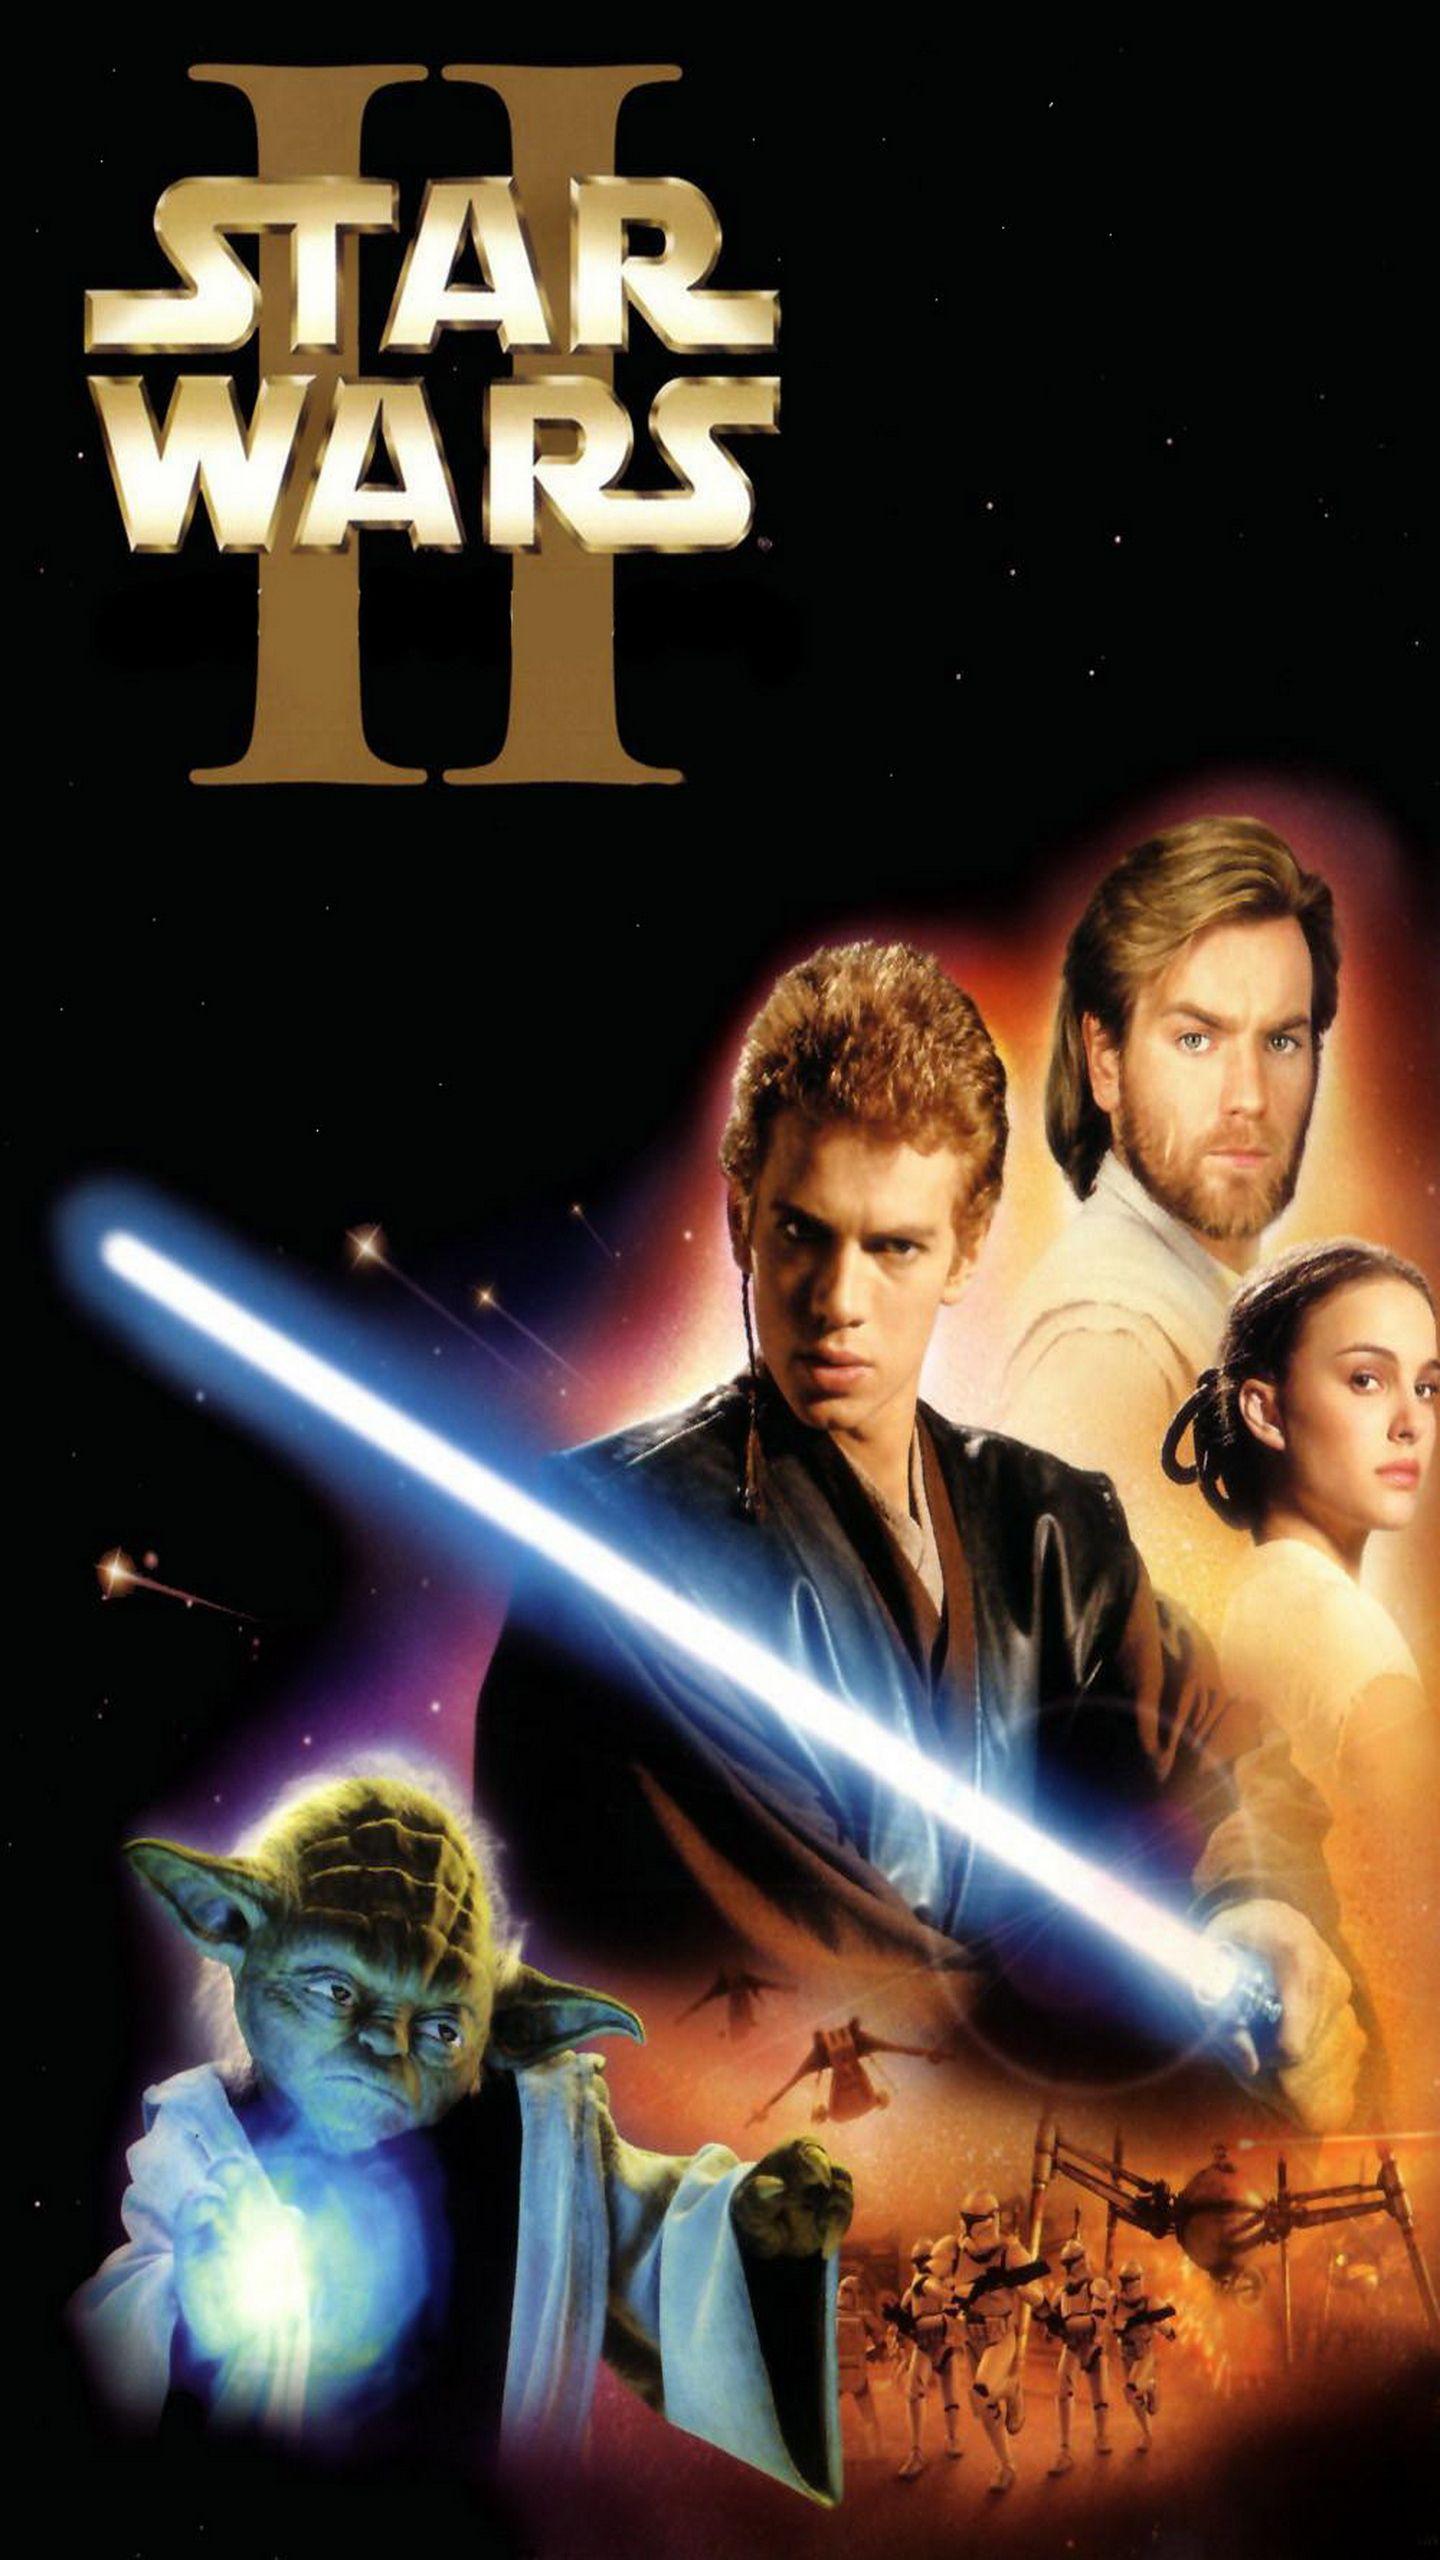 Star Wars Ep. III: Revenge of the Sith for iphone download